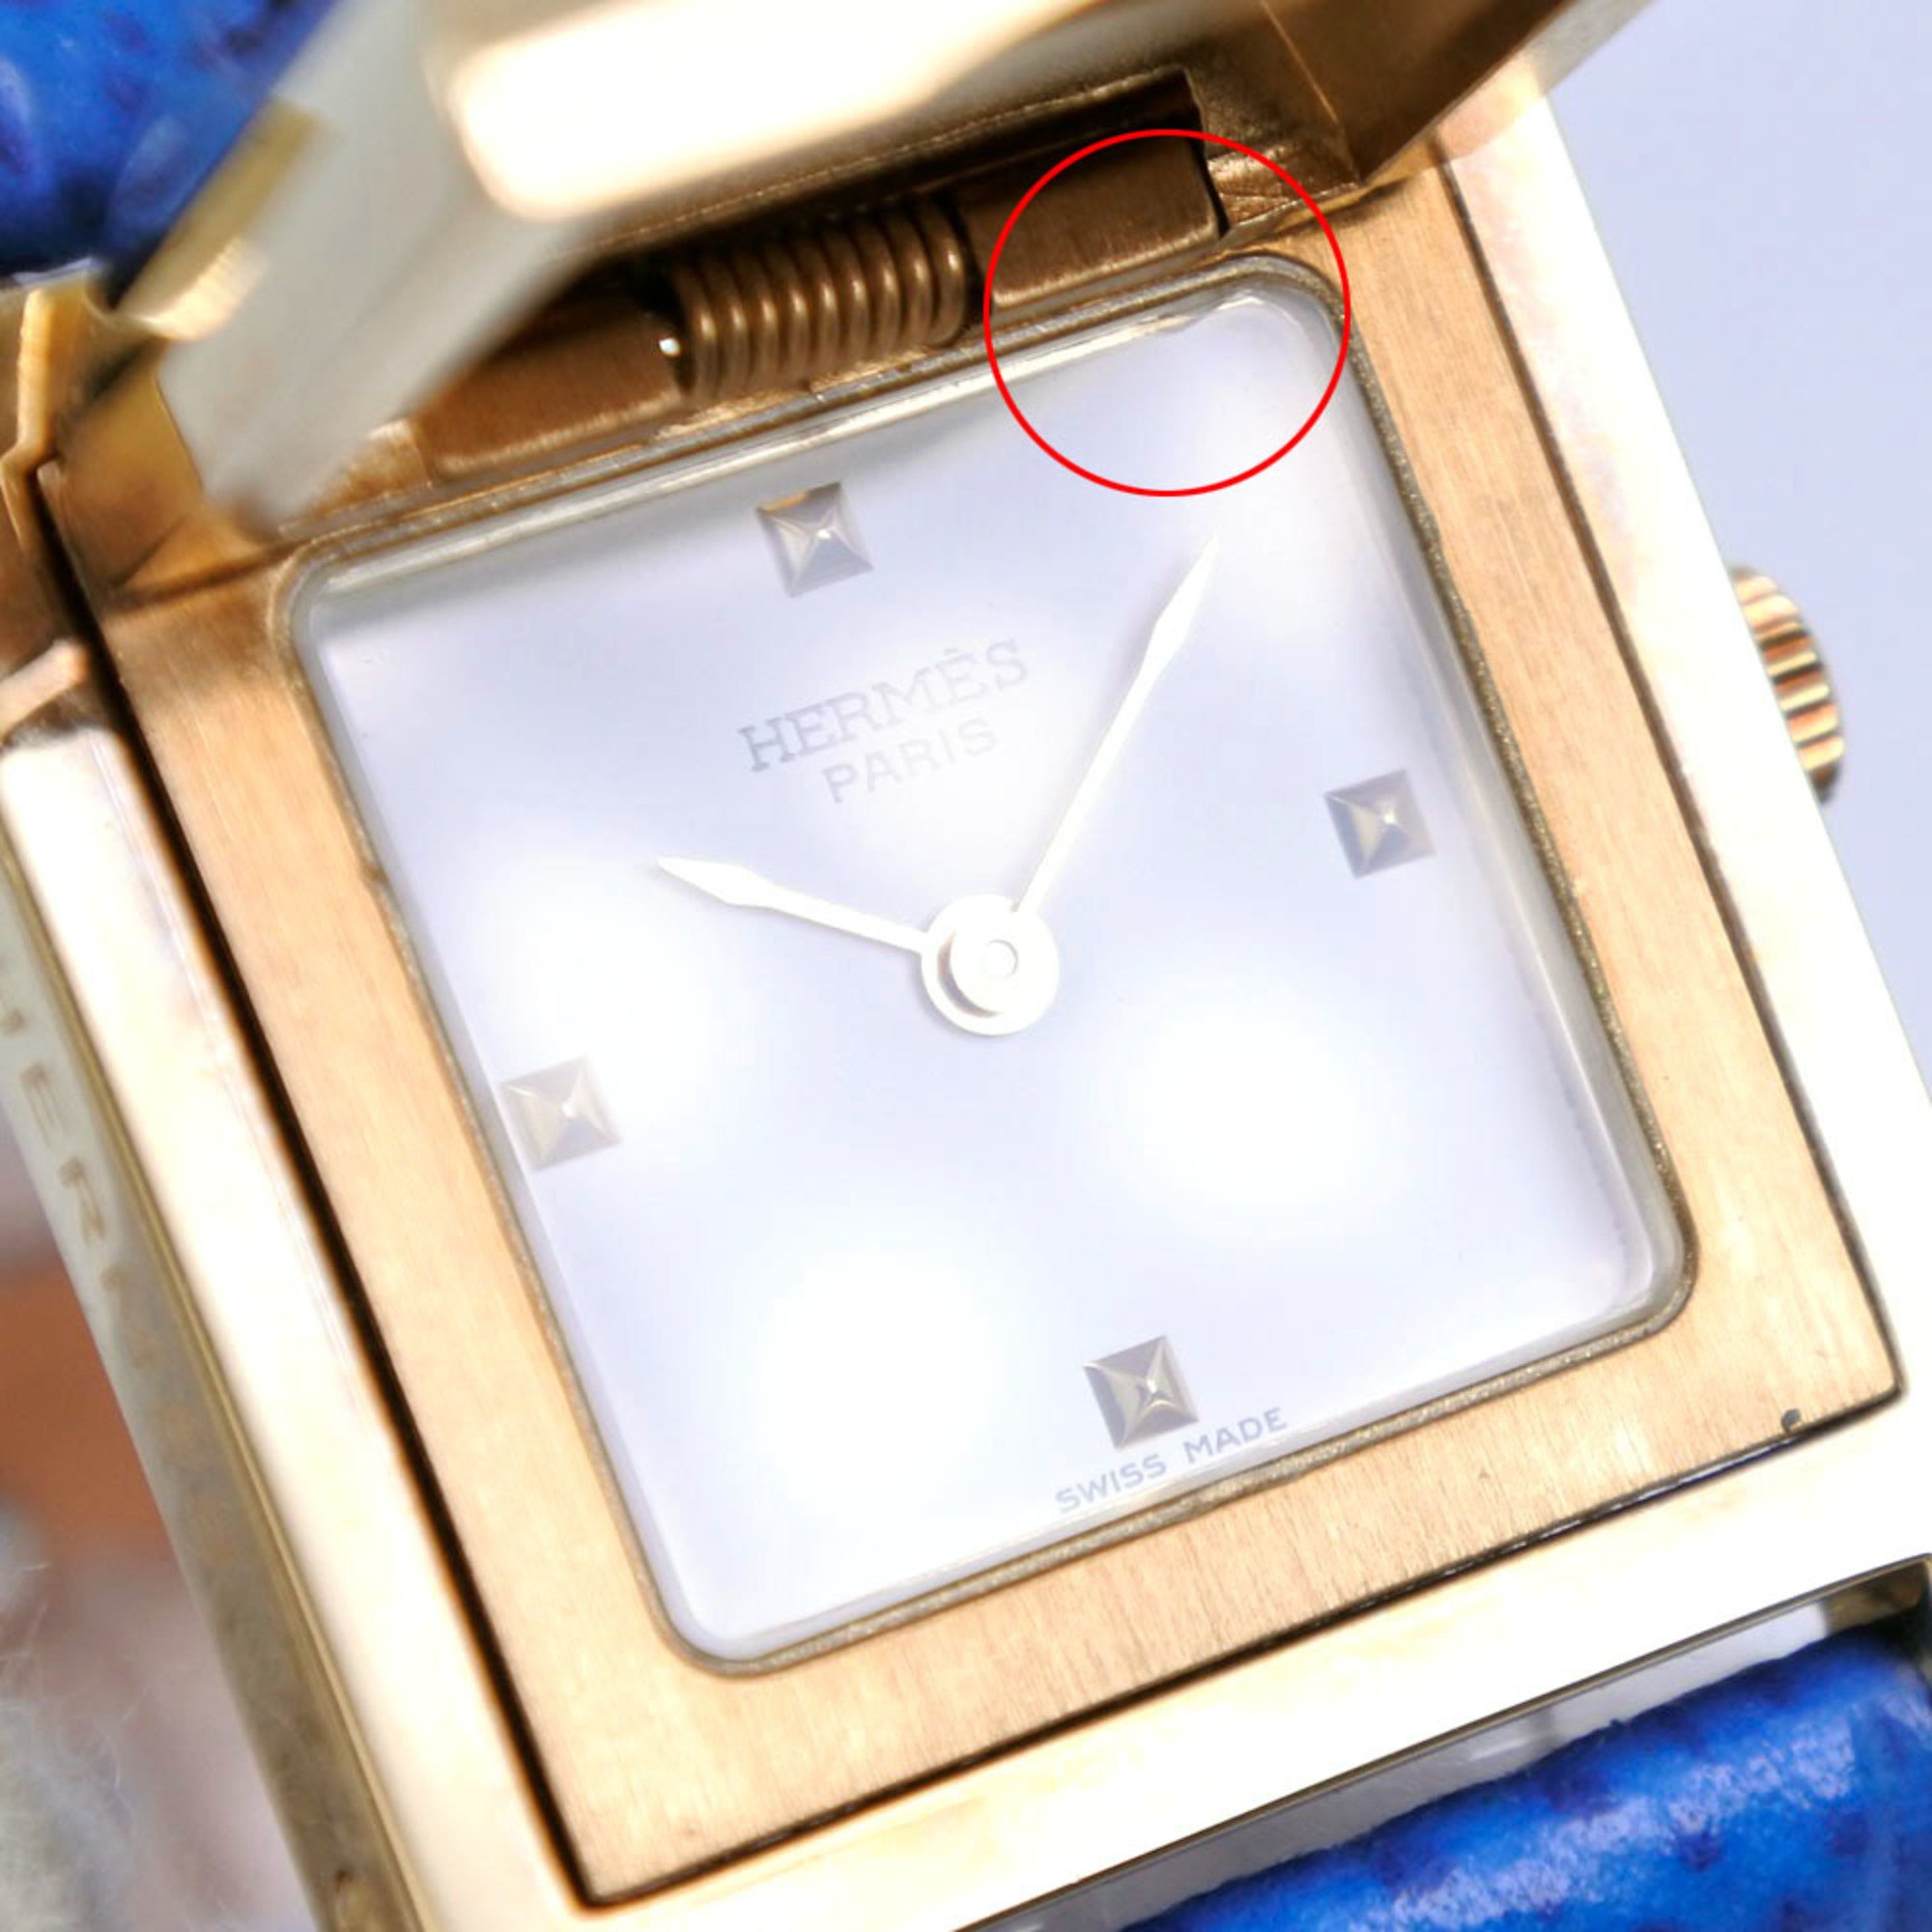 HERMES Hermes Medor ME1.210 Gold Plated x Leather Blue 〇W Quartz Analog Display Women's White Dial Watch